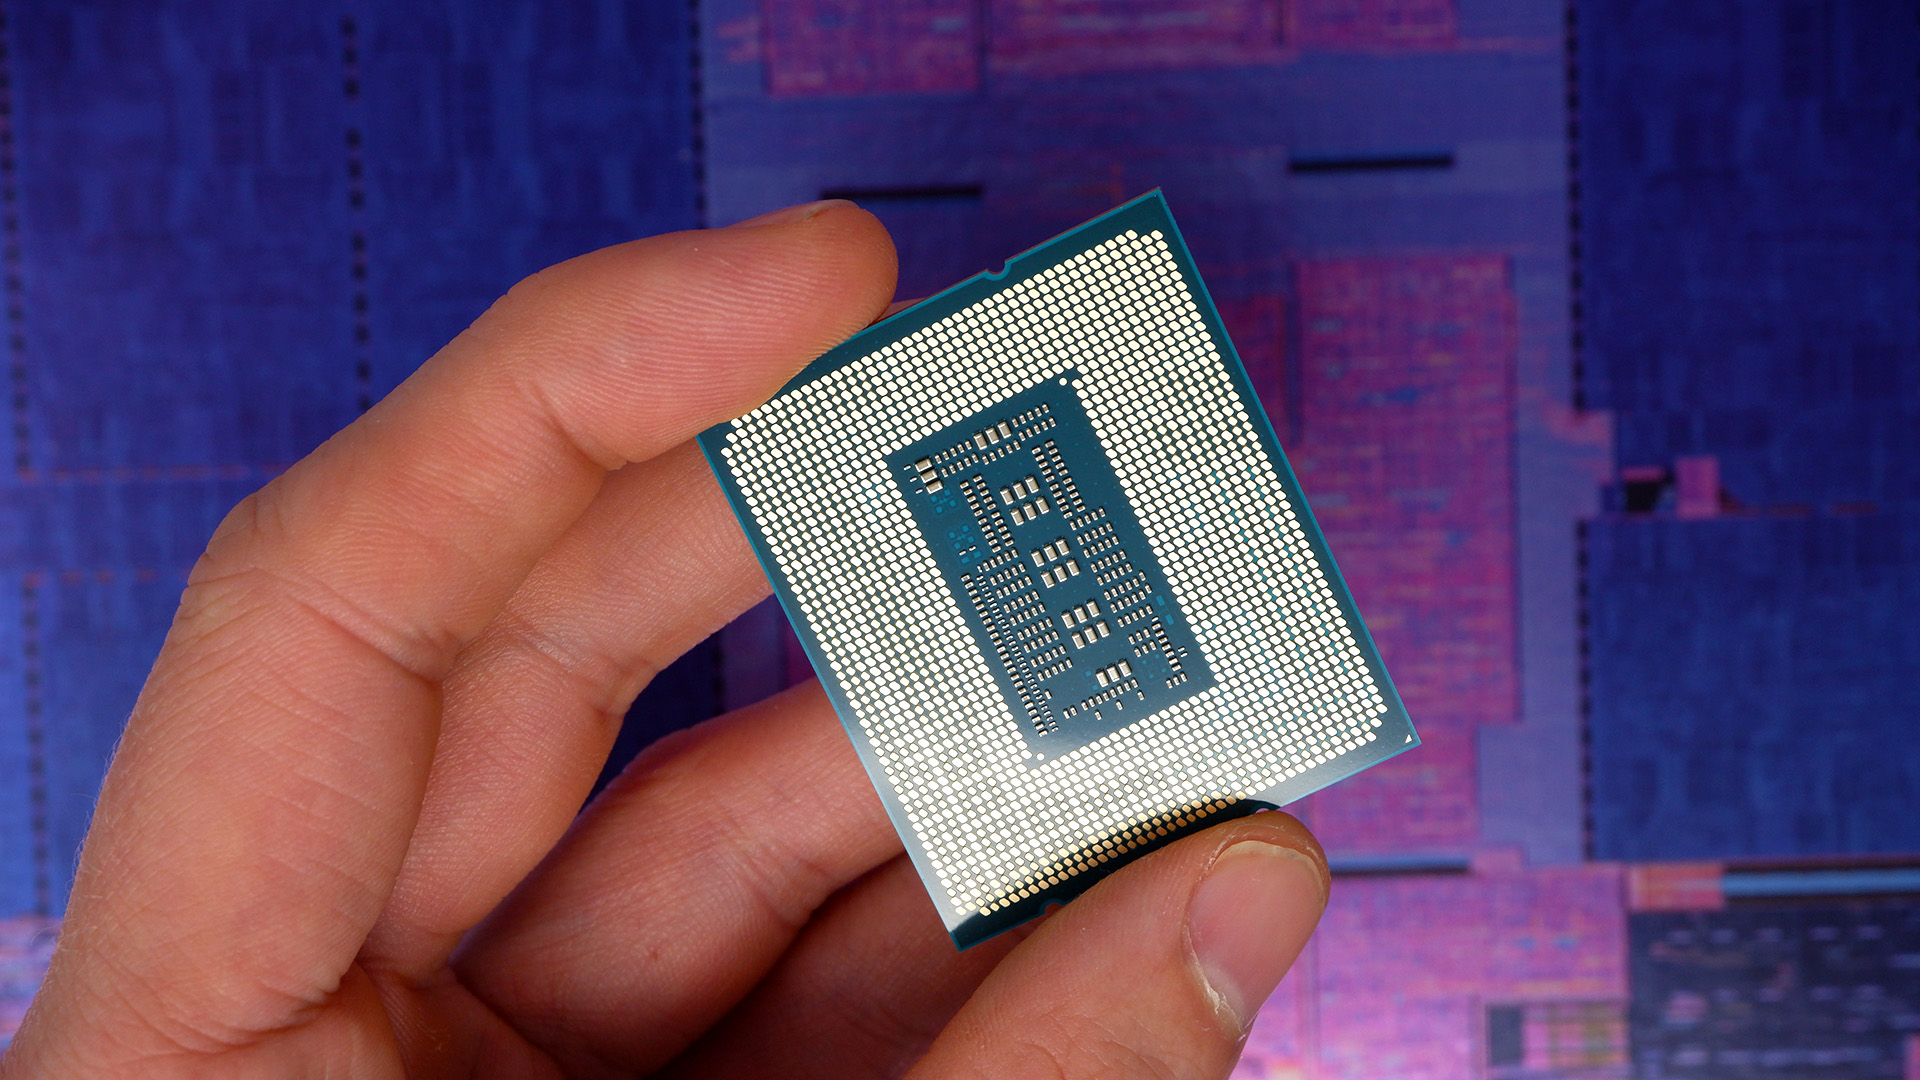  Intel CPU crashes: what you need to know—microcode to blame but fix incoming this month, alongside two-year extended warranty 